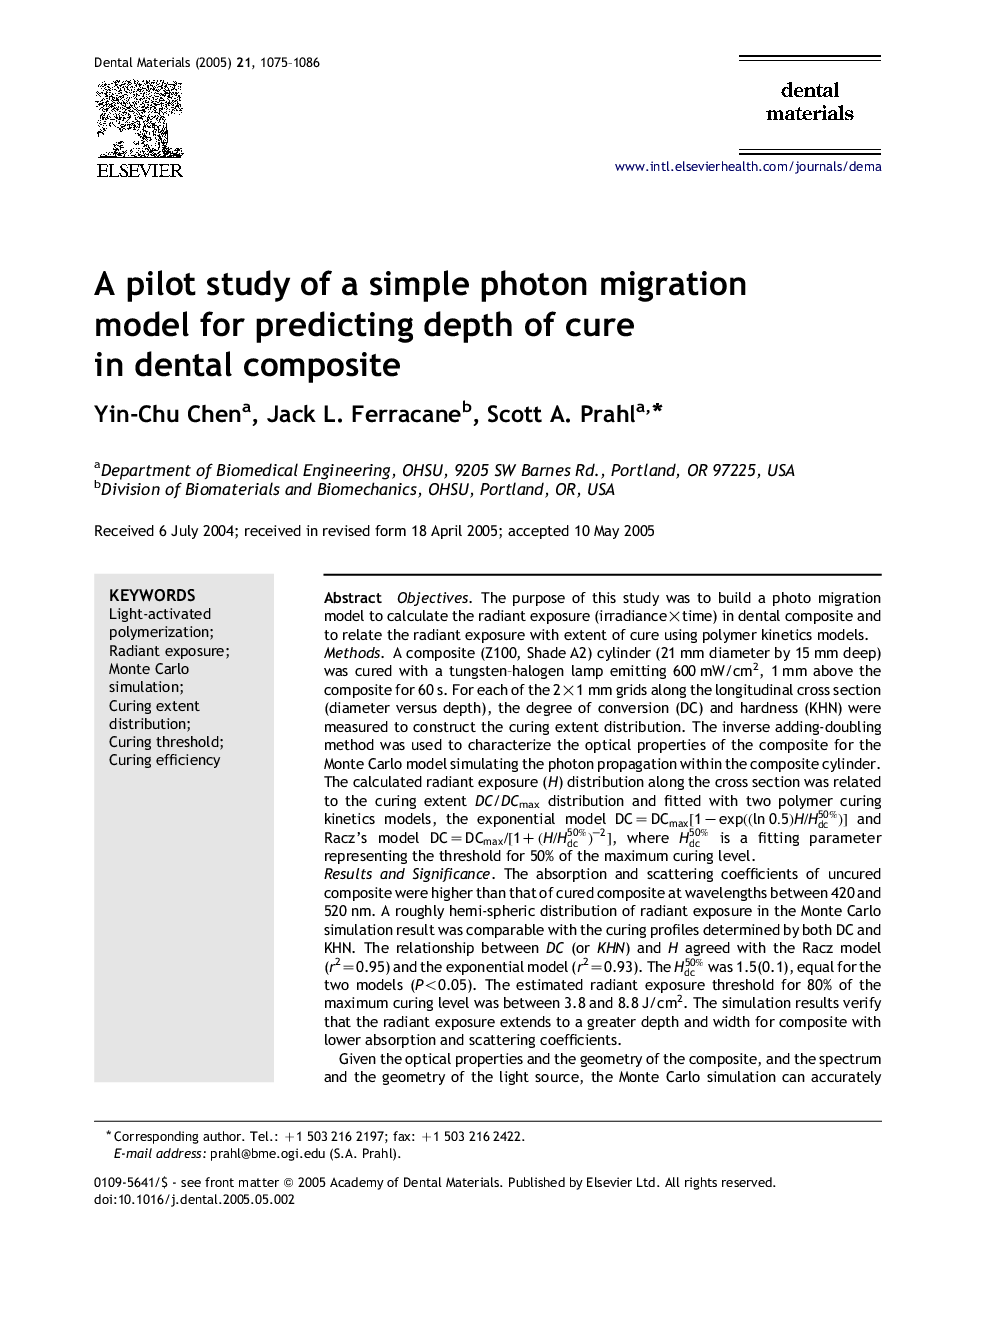 A pilot study of a simple photon migration model for predicting depth of cure in dental composite